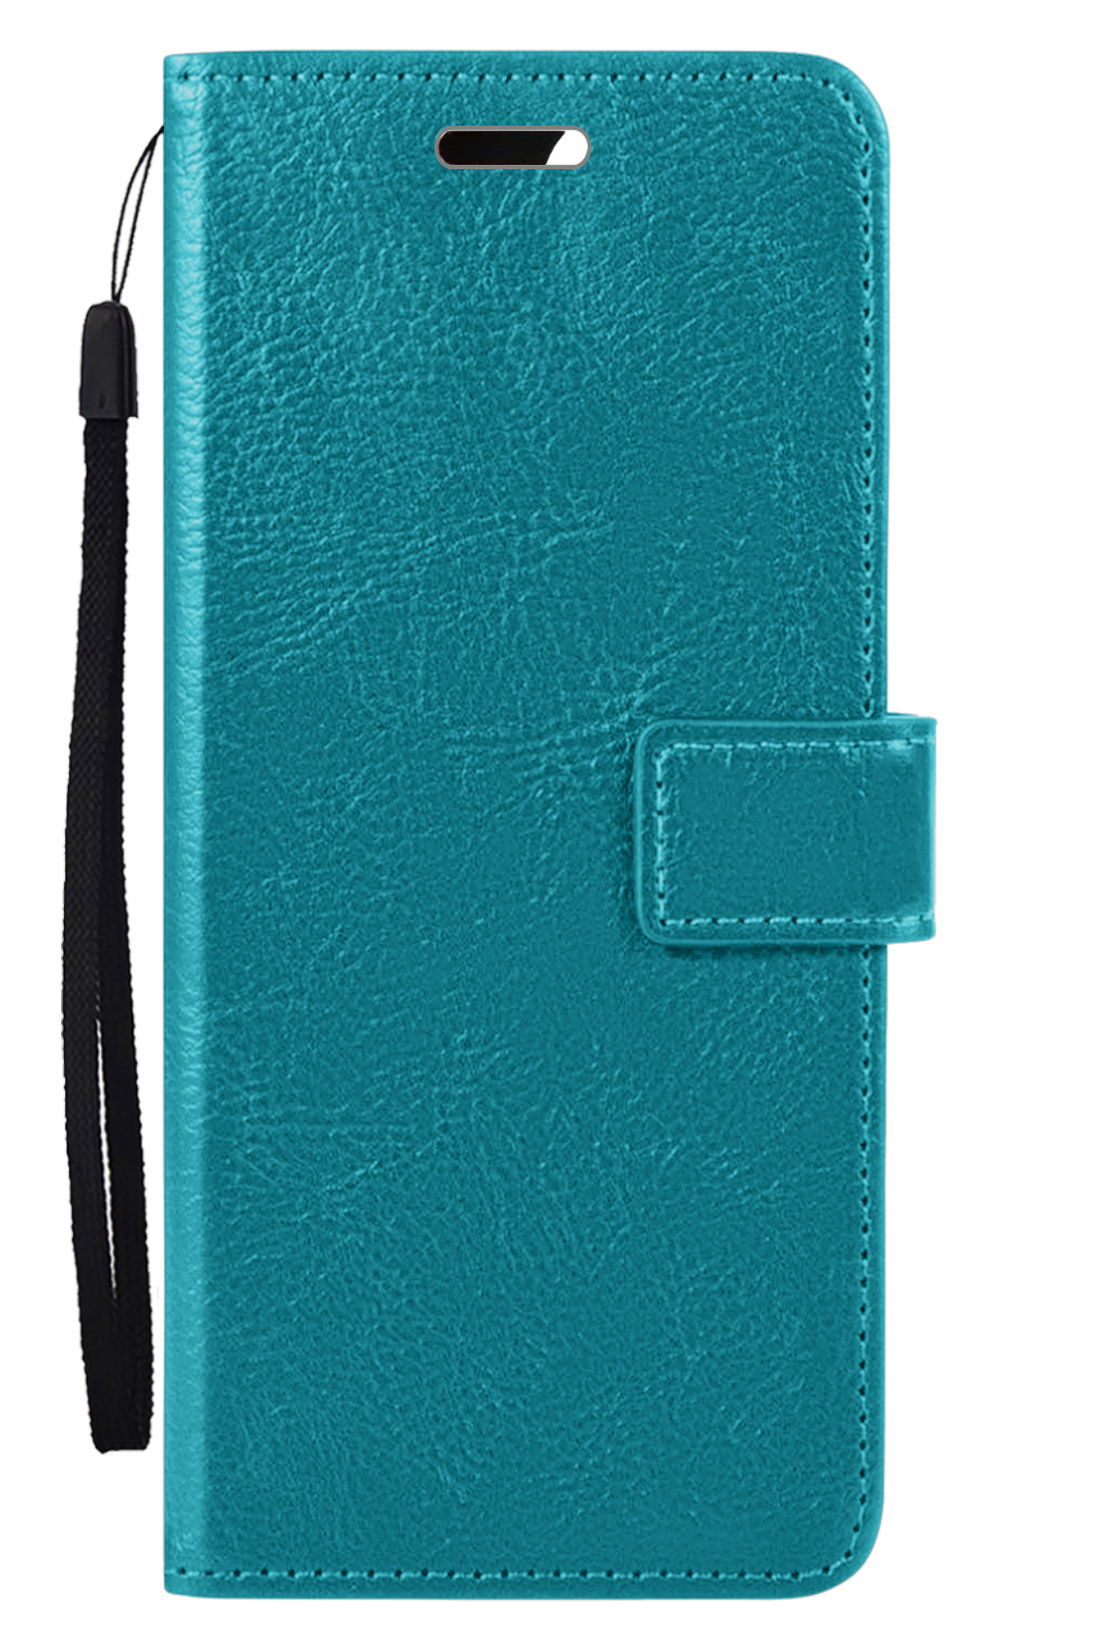 Samsung Galaxy A13 4G Hoes Bookcase Turquoise - Flipcase Turquoise - Samsung Galaxy A13 4G Book Cover - Samsung Galaxy A13 4G Hoesje Turquoise